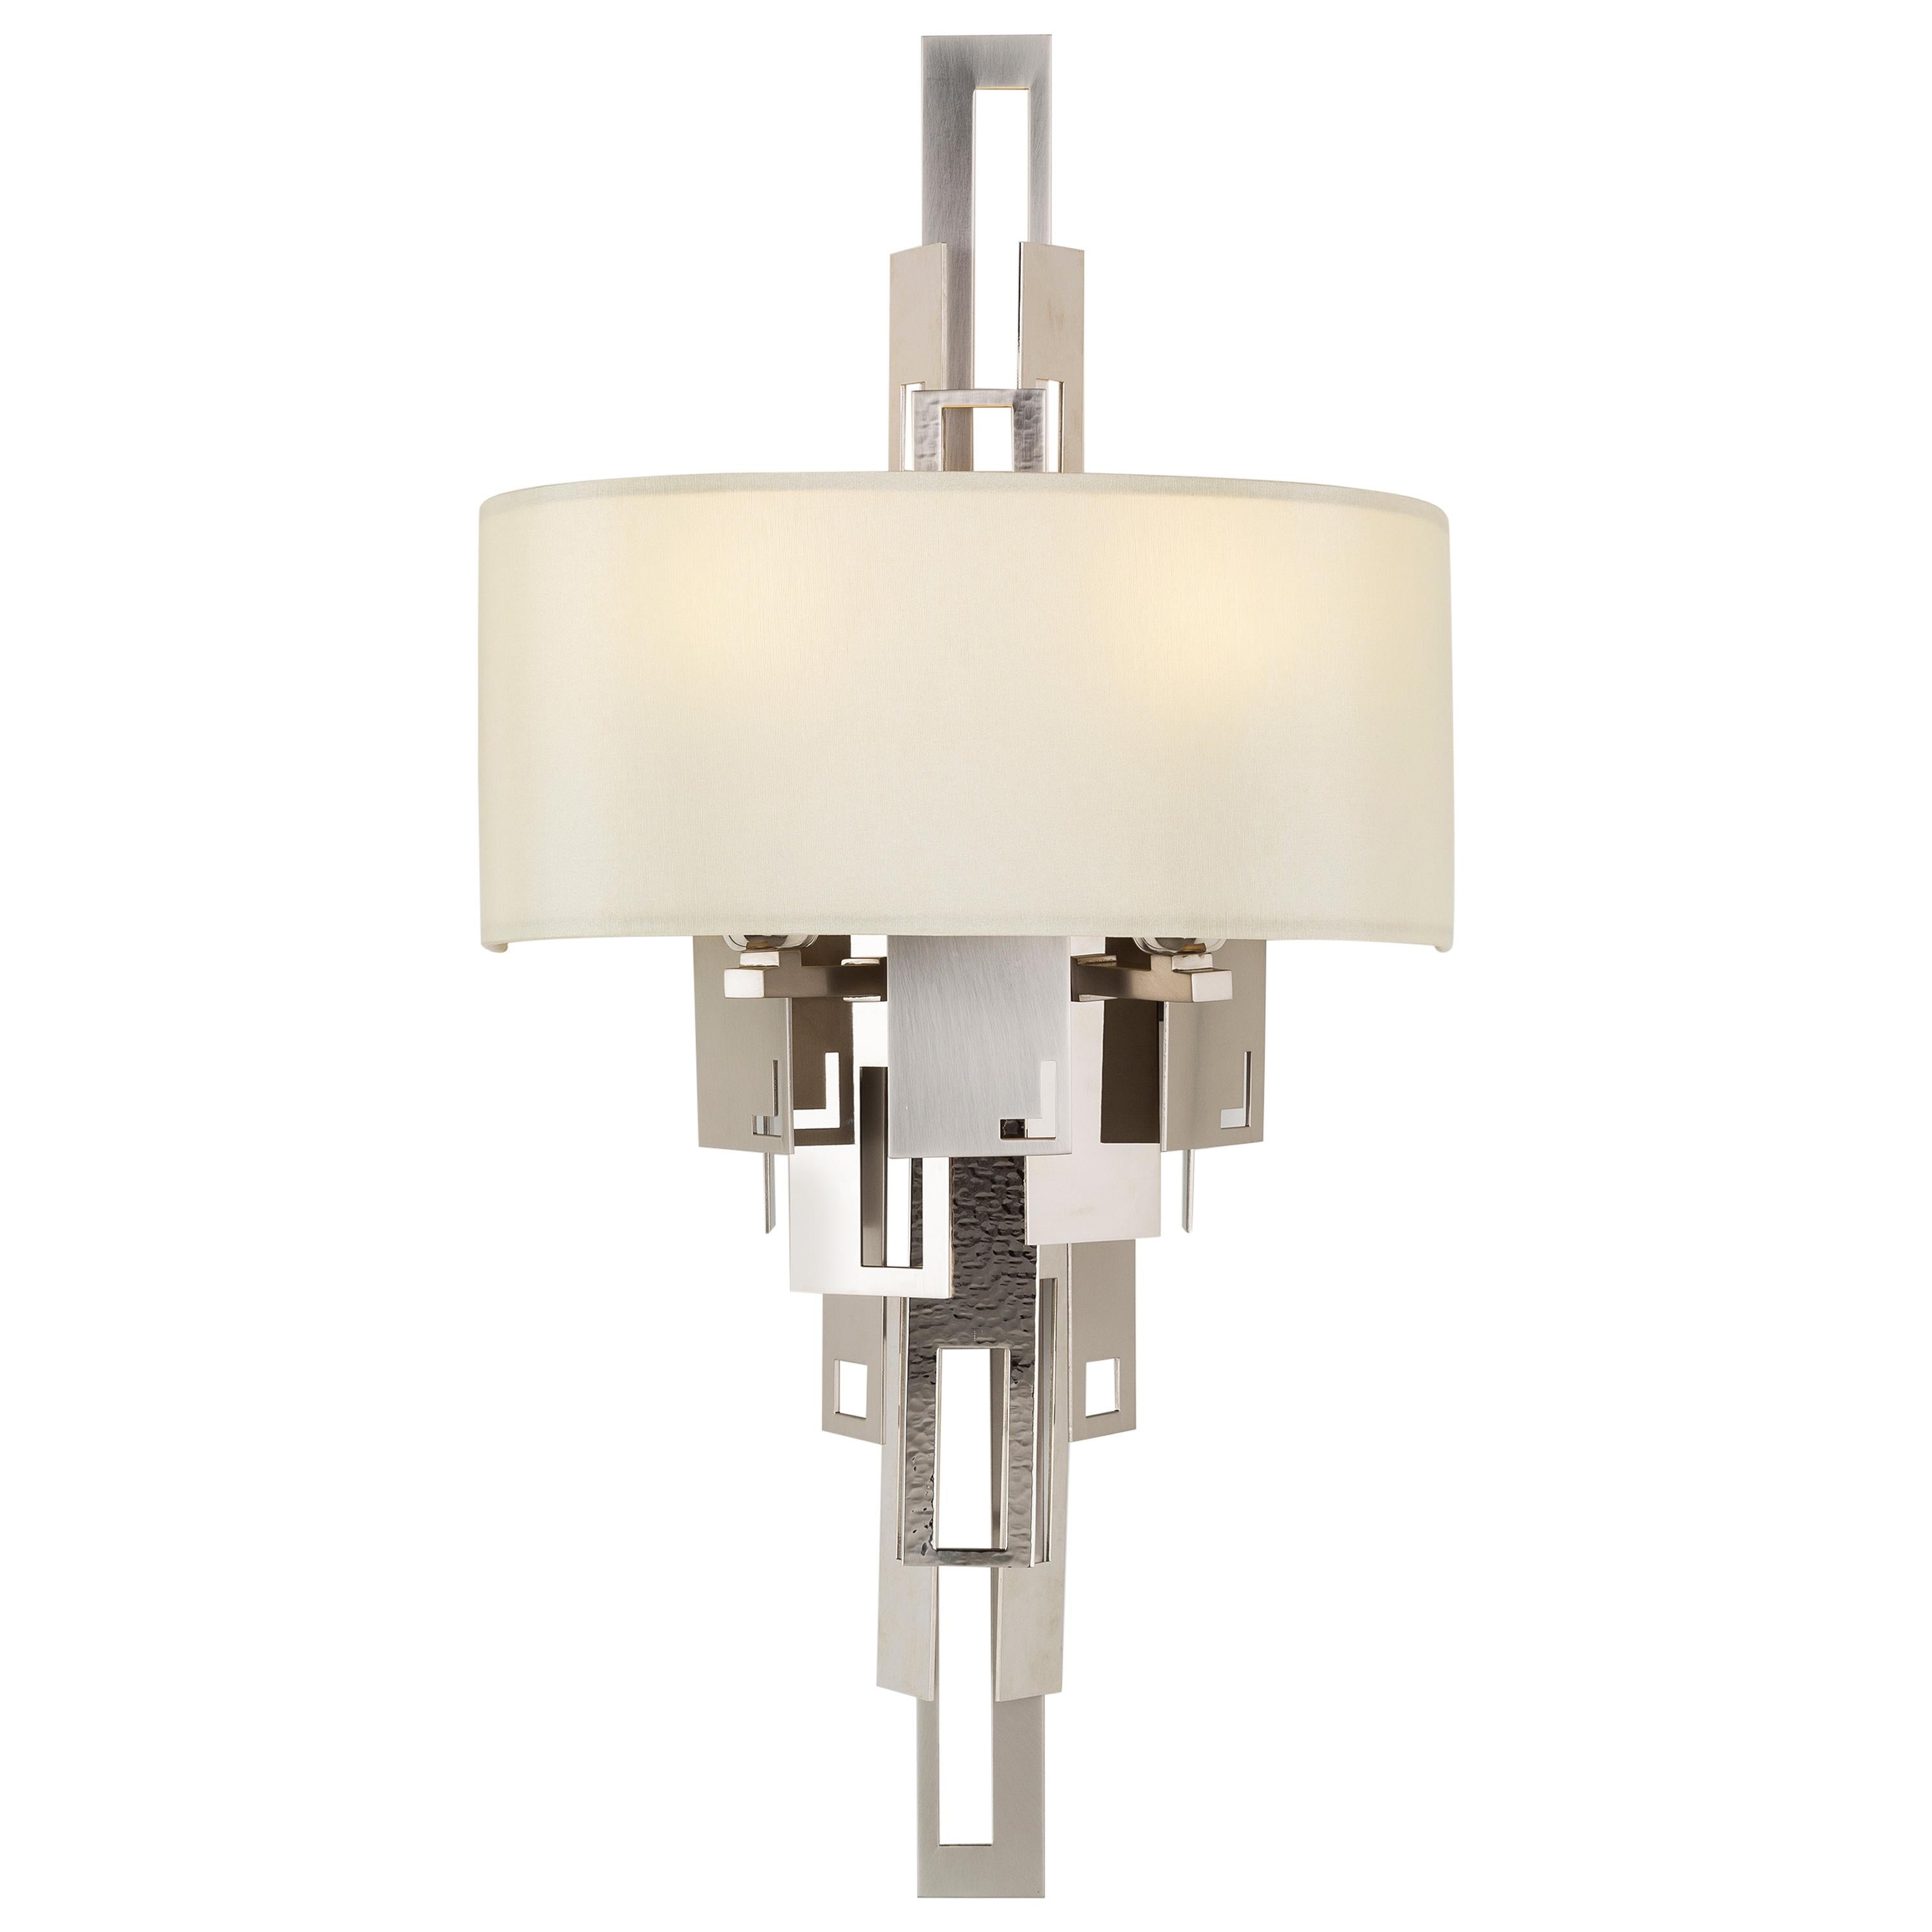 GLAM Wall Lamp 721-NN-11 by OFFICINA LUCE